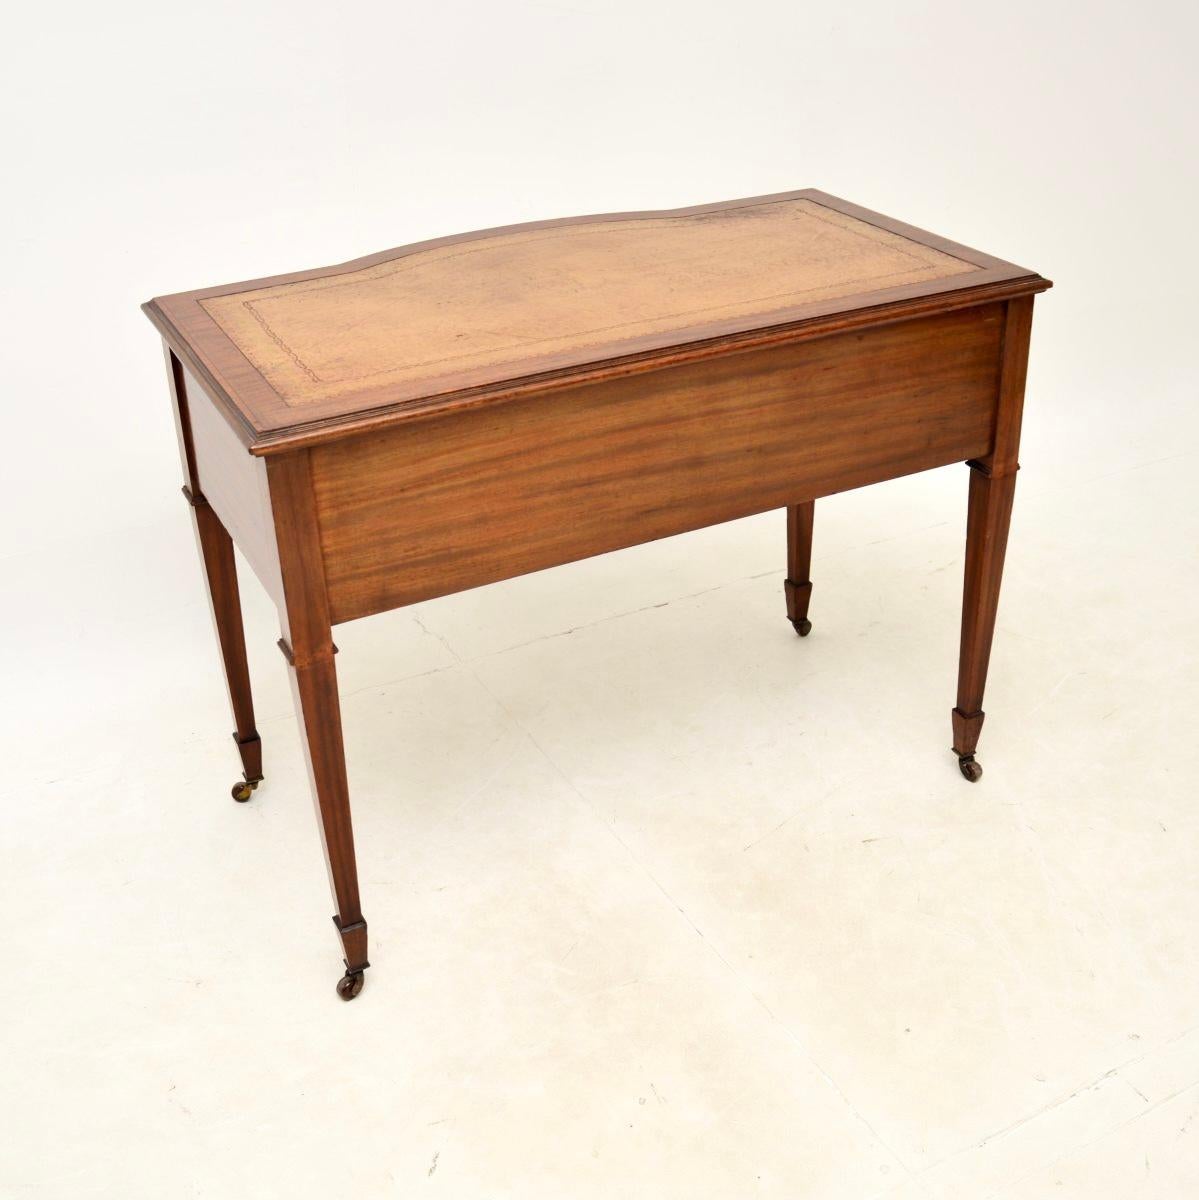 Antique Sheraton Revival Satinwood Desk In Good Condition For Sale In London, GB